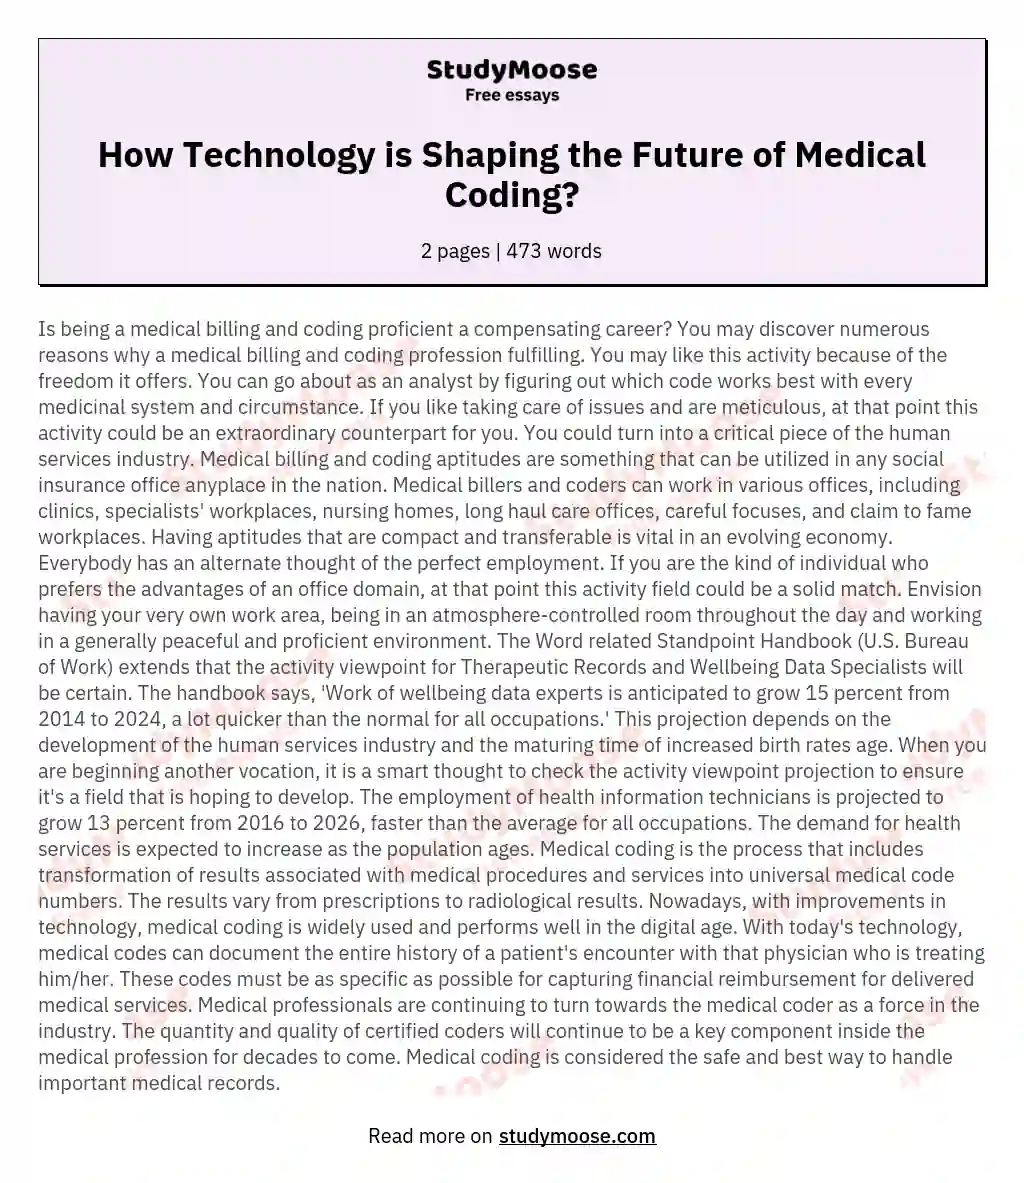 How Technology is Shaping the Future of Medical Coding? essay